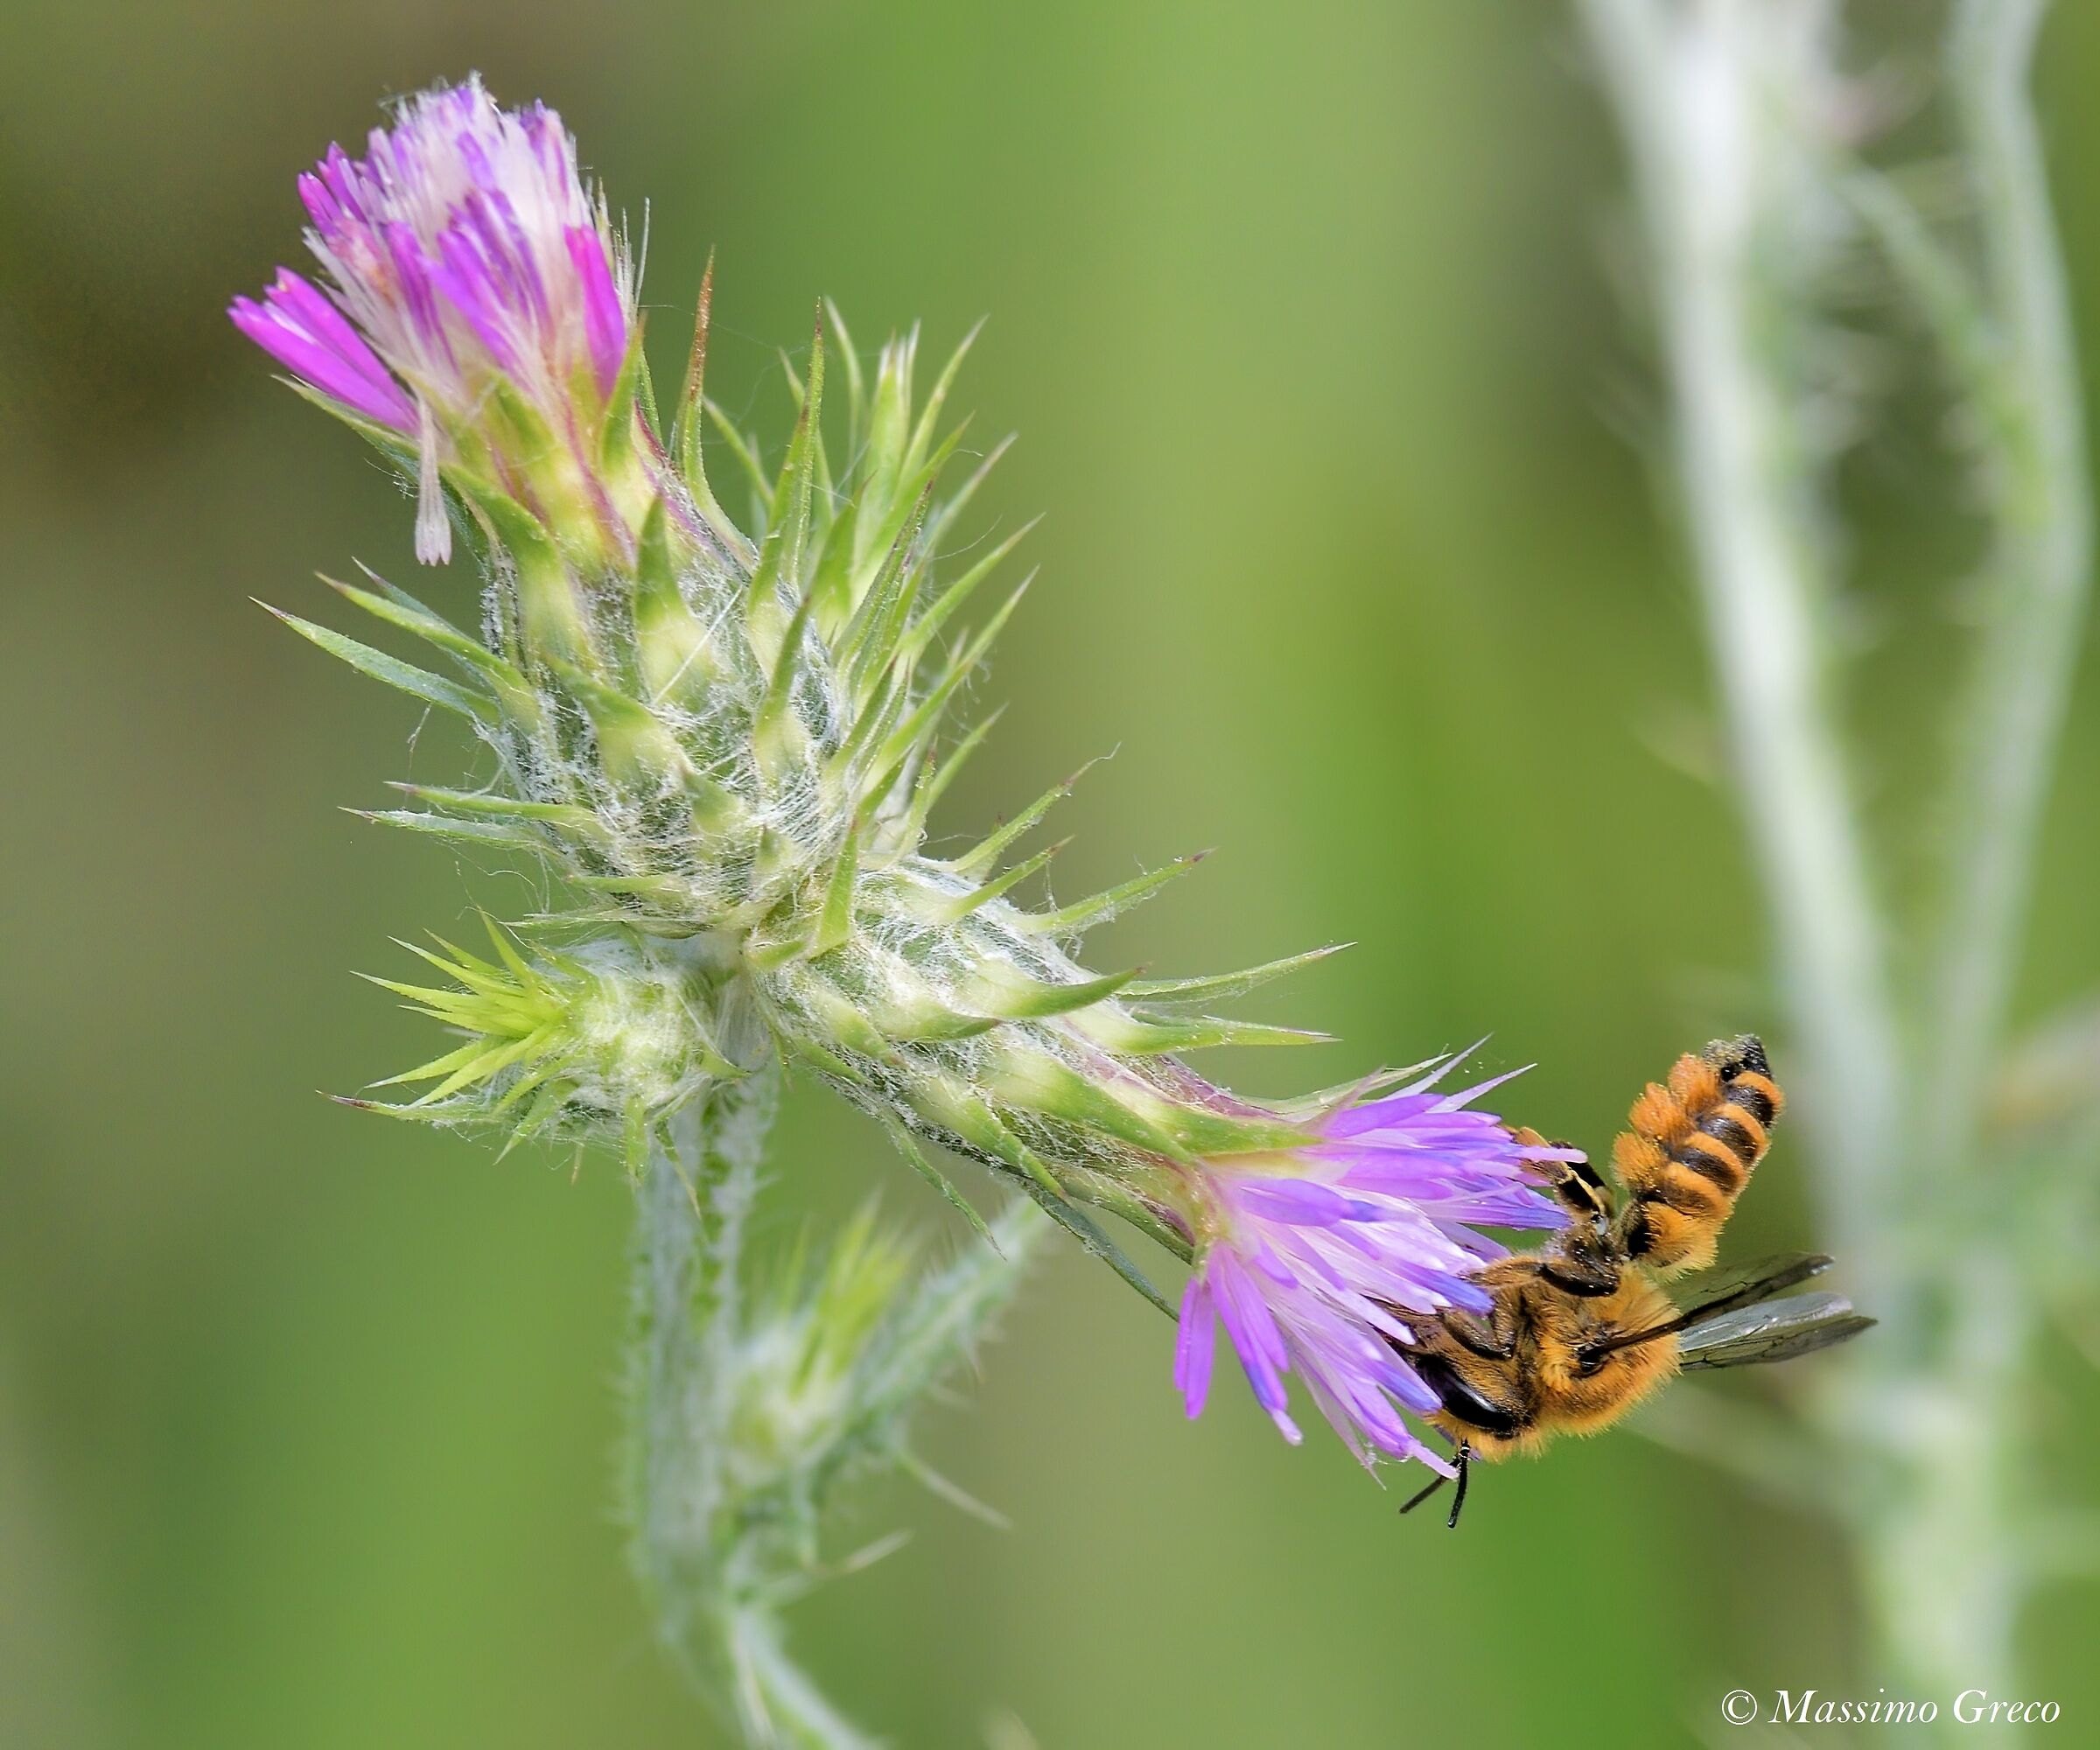 The Bee on the Thistle...